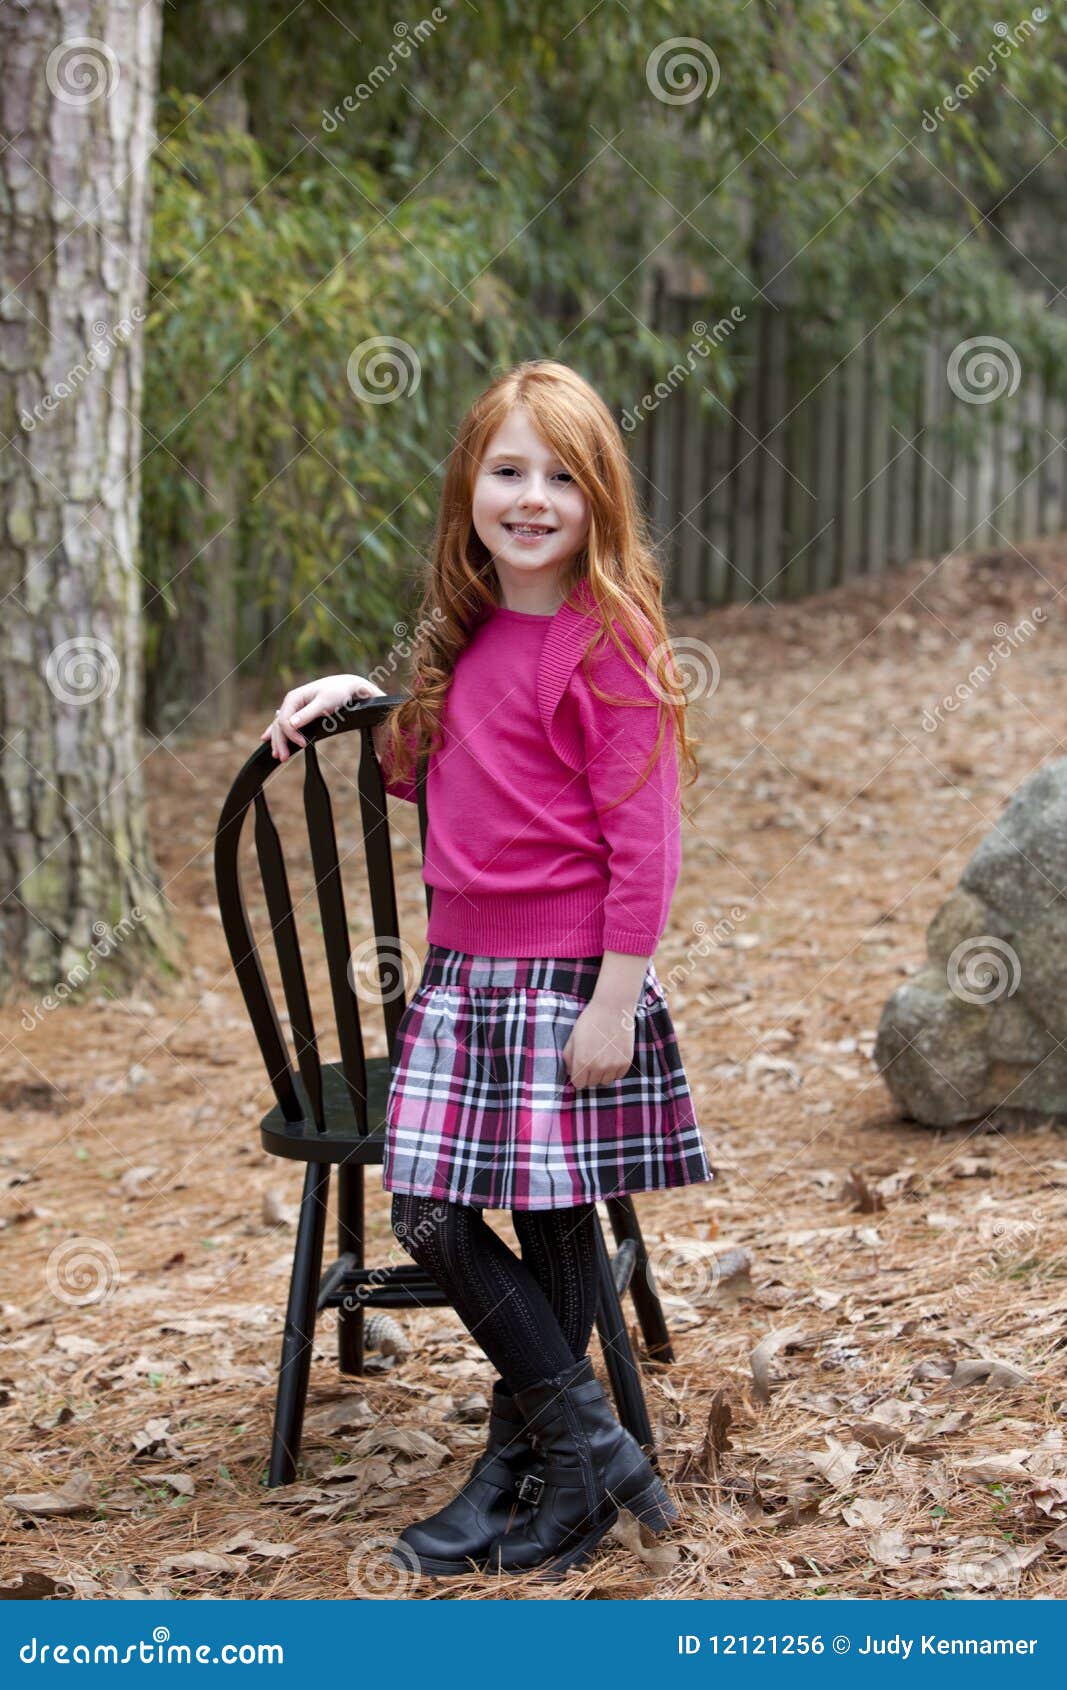 Smiling Little Red Haired Girl Stock Photo - Image: 12121256